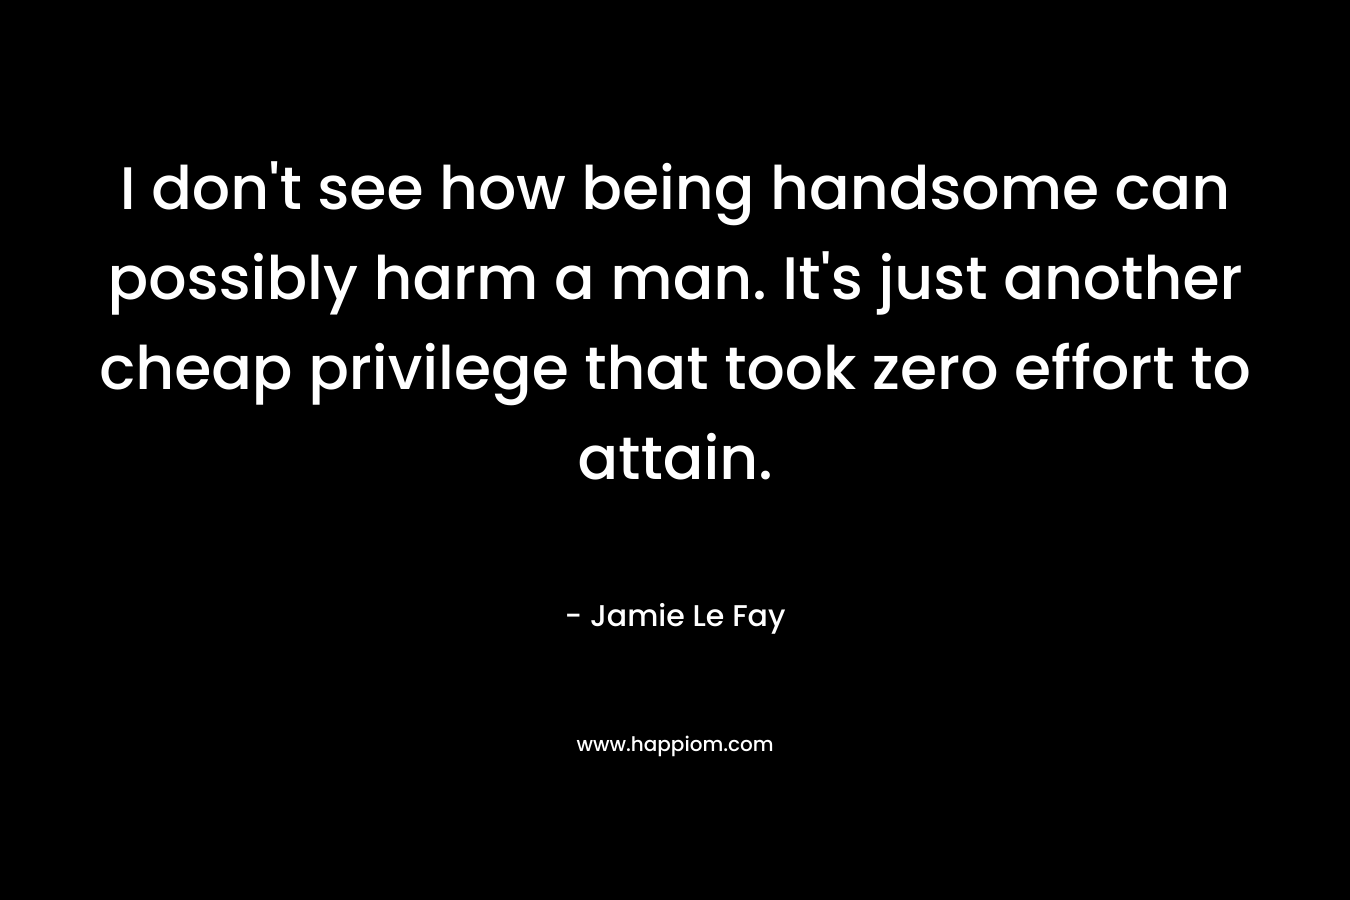 I don’t see how being handsome can possibly harm a man. It’s just another cheap privilege that took zero effort to attain. – Jamie Le Fay